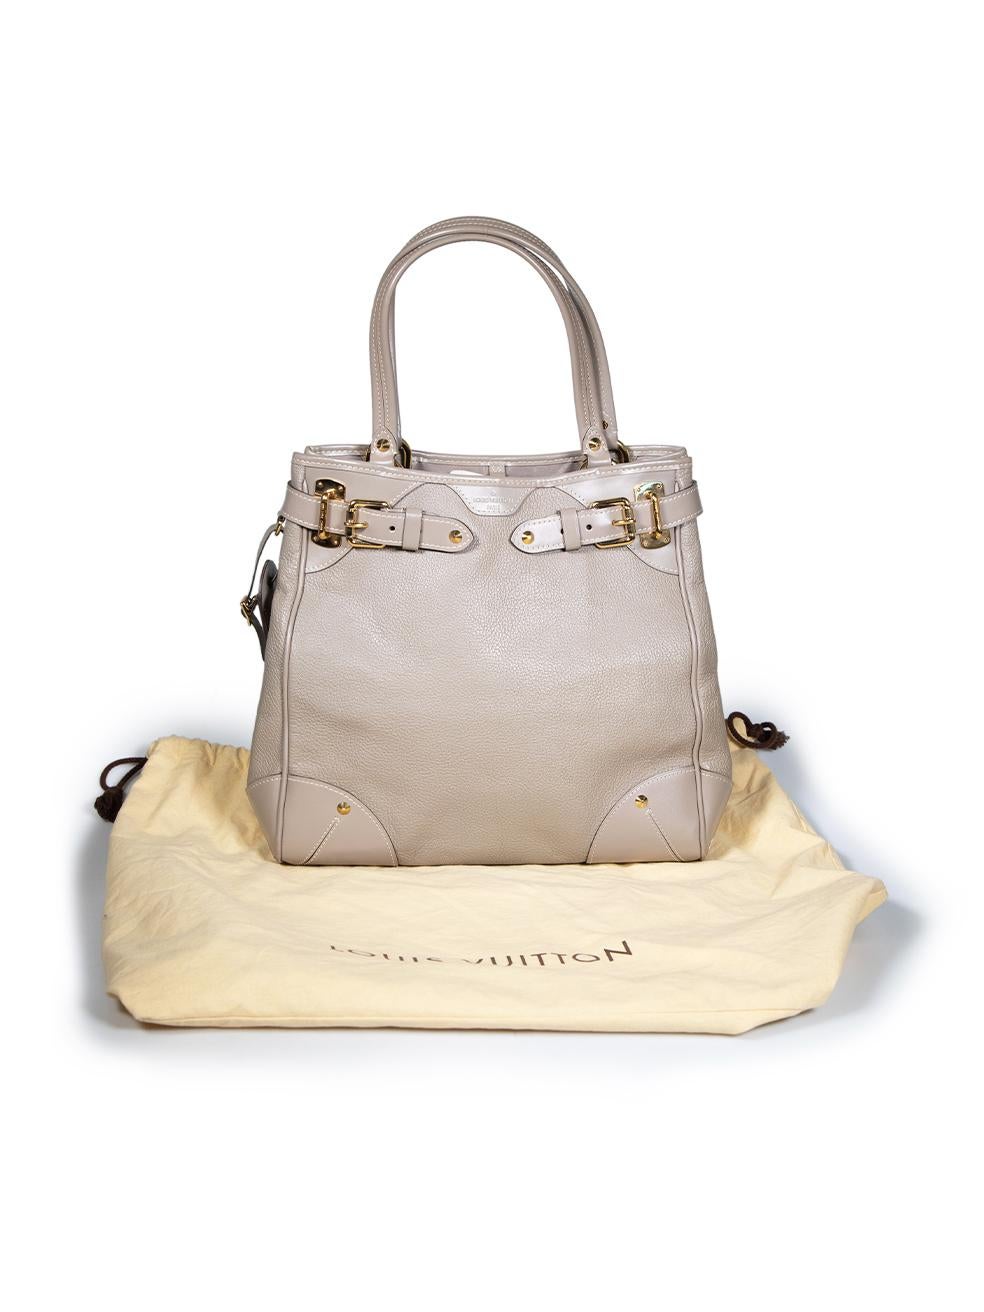 Louis Vuitton 2008 Taupe Leather Le Majestueux Suhali Shopping Tote For Sale 3